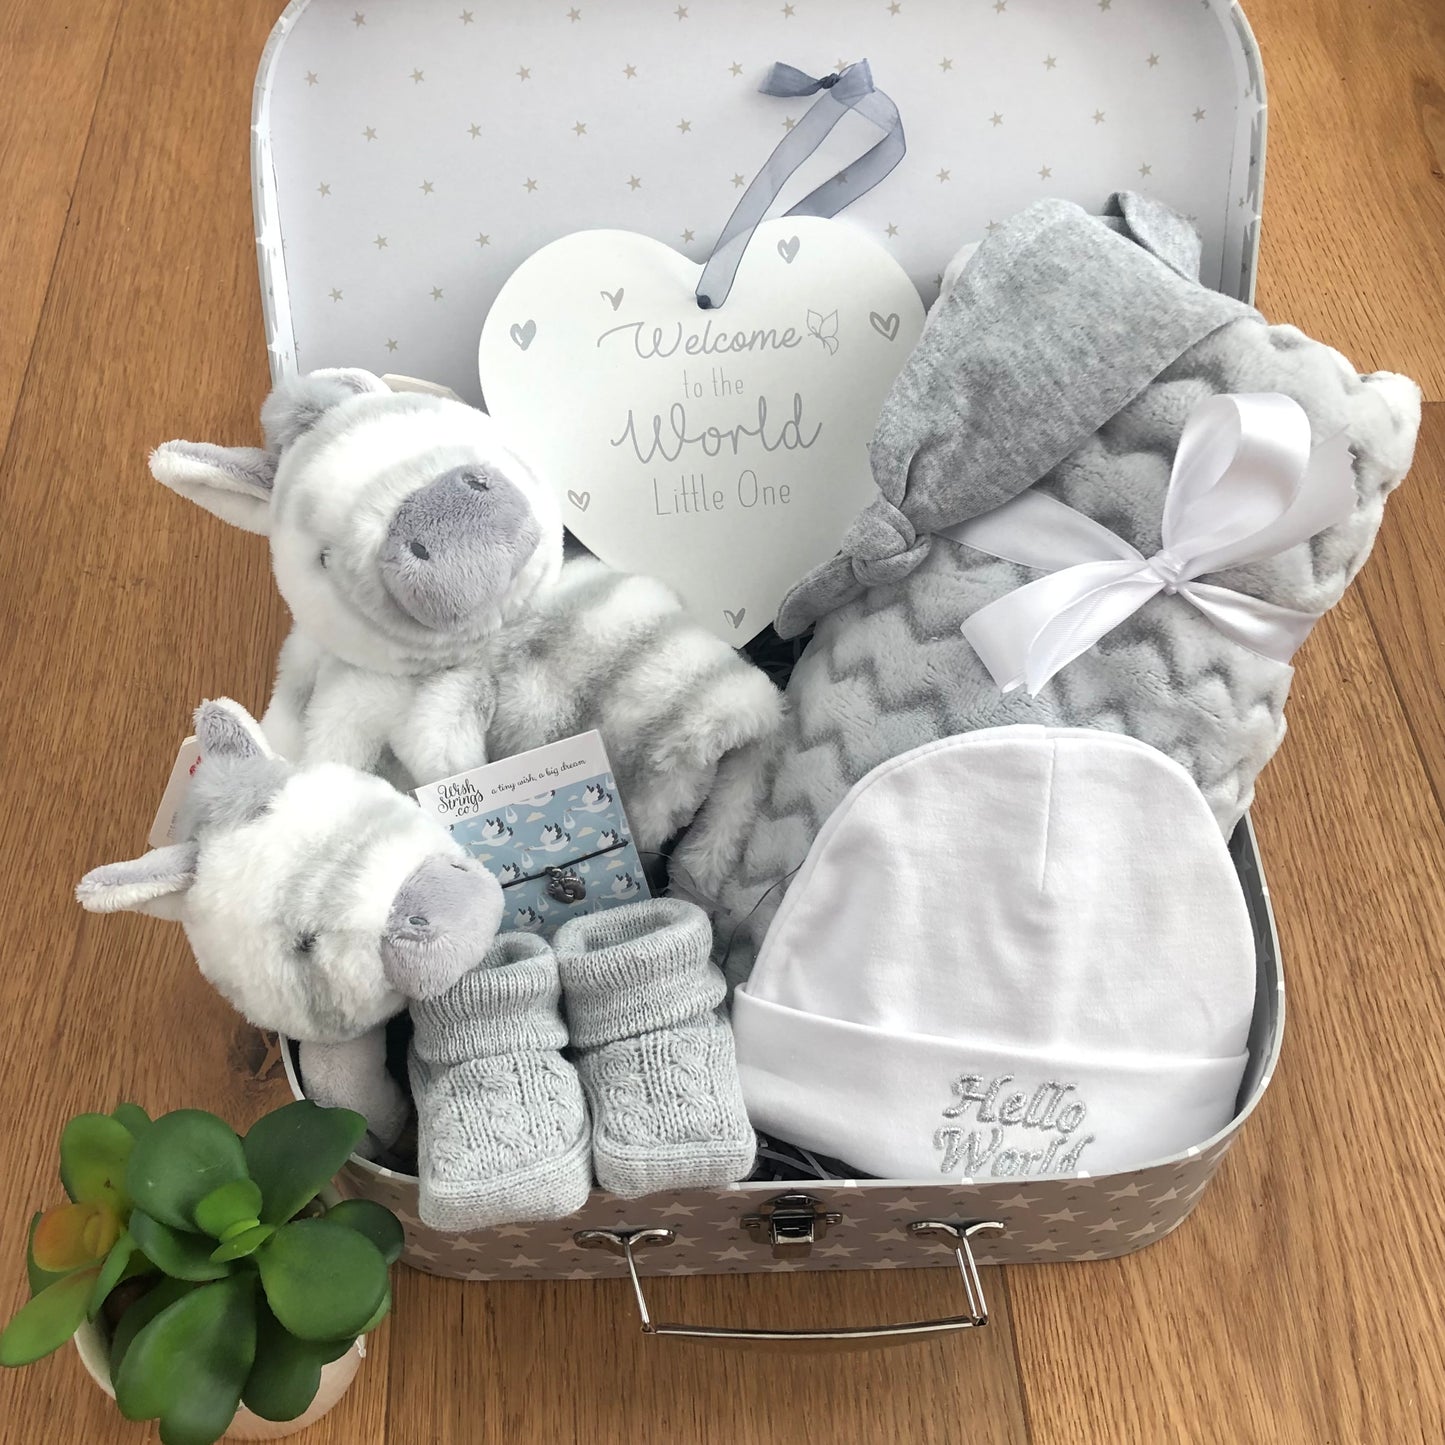 This zebra themed baby hamper comes in a grey and white star patterned baby keepsake case and contains A soft zebra baby comforter, a soft zebra baby rattle on a woooden teething ring, a grey baby blankets with a chevron pettern, a pair of grey baby booties, a wish bracelet, a baby grey knot hat and a white cotton baby hat that has the words "hello world" embroidered on the front and a nursery plaque that says" Welcome to the world little one".